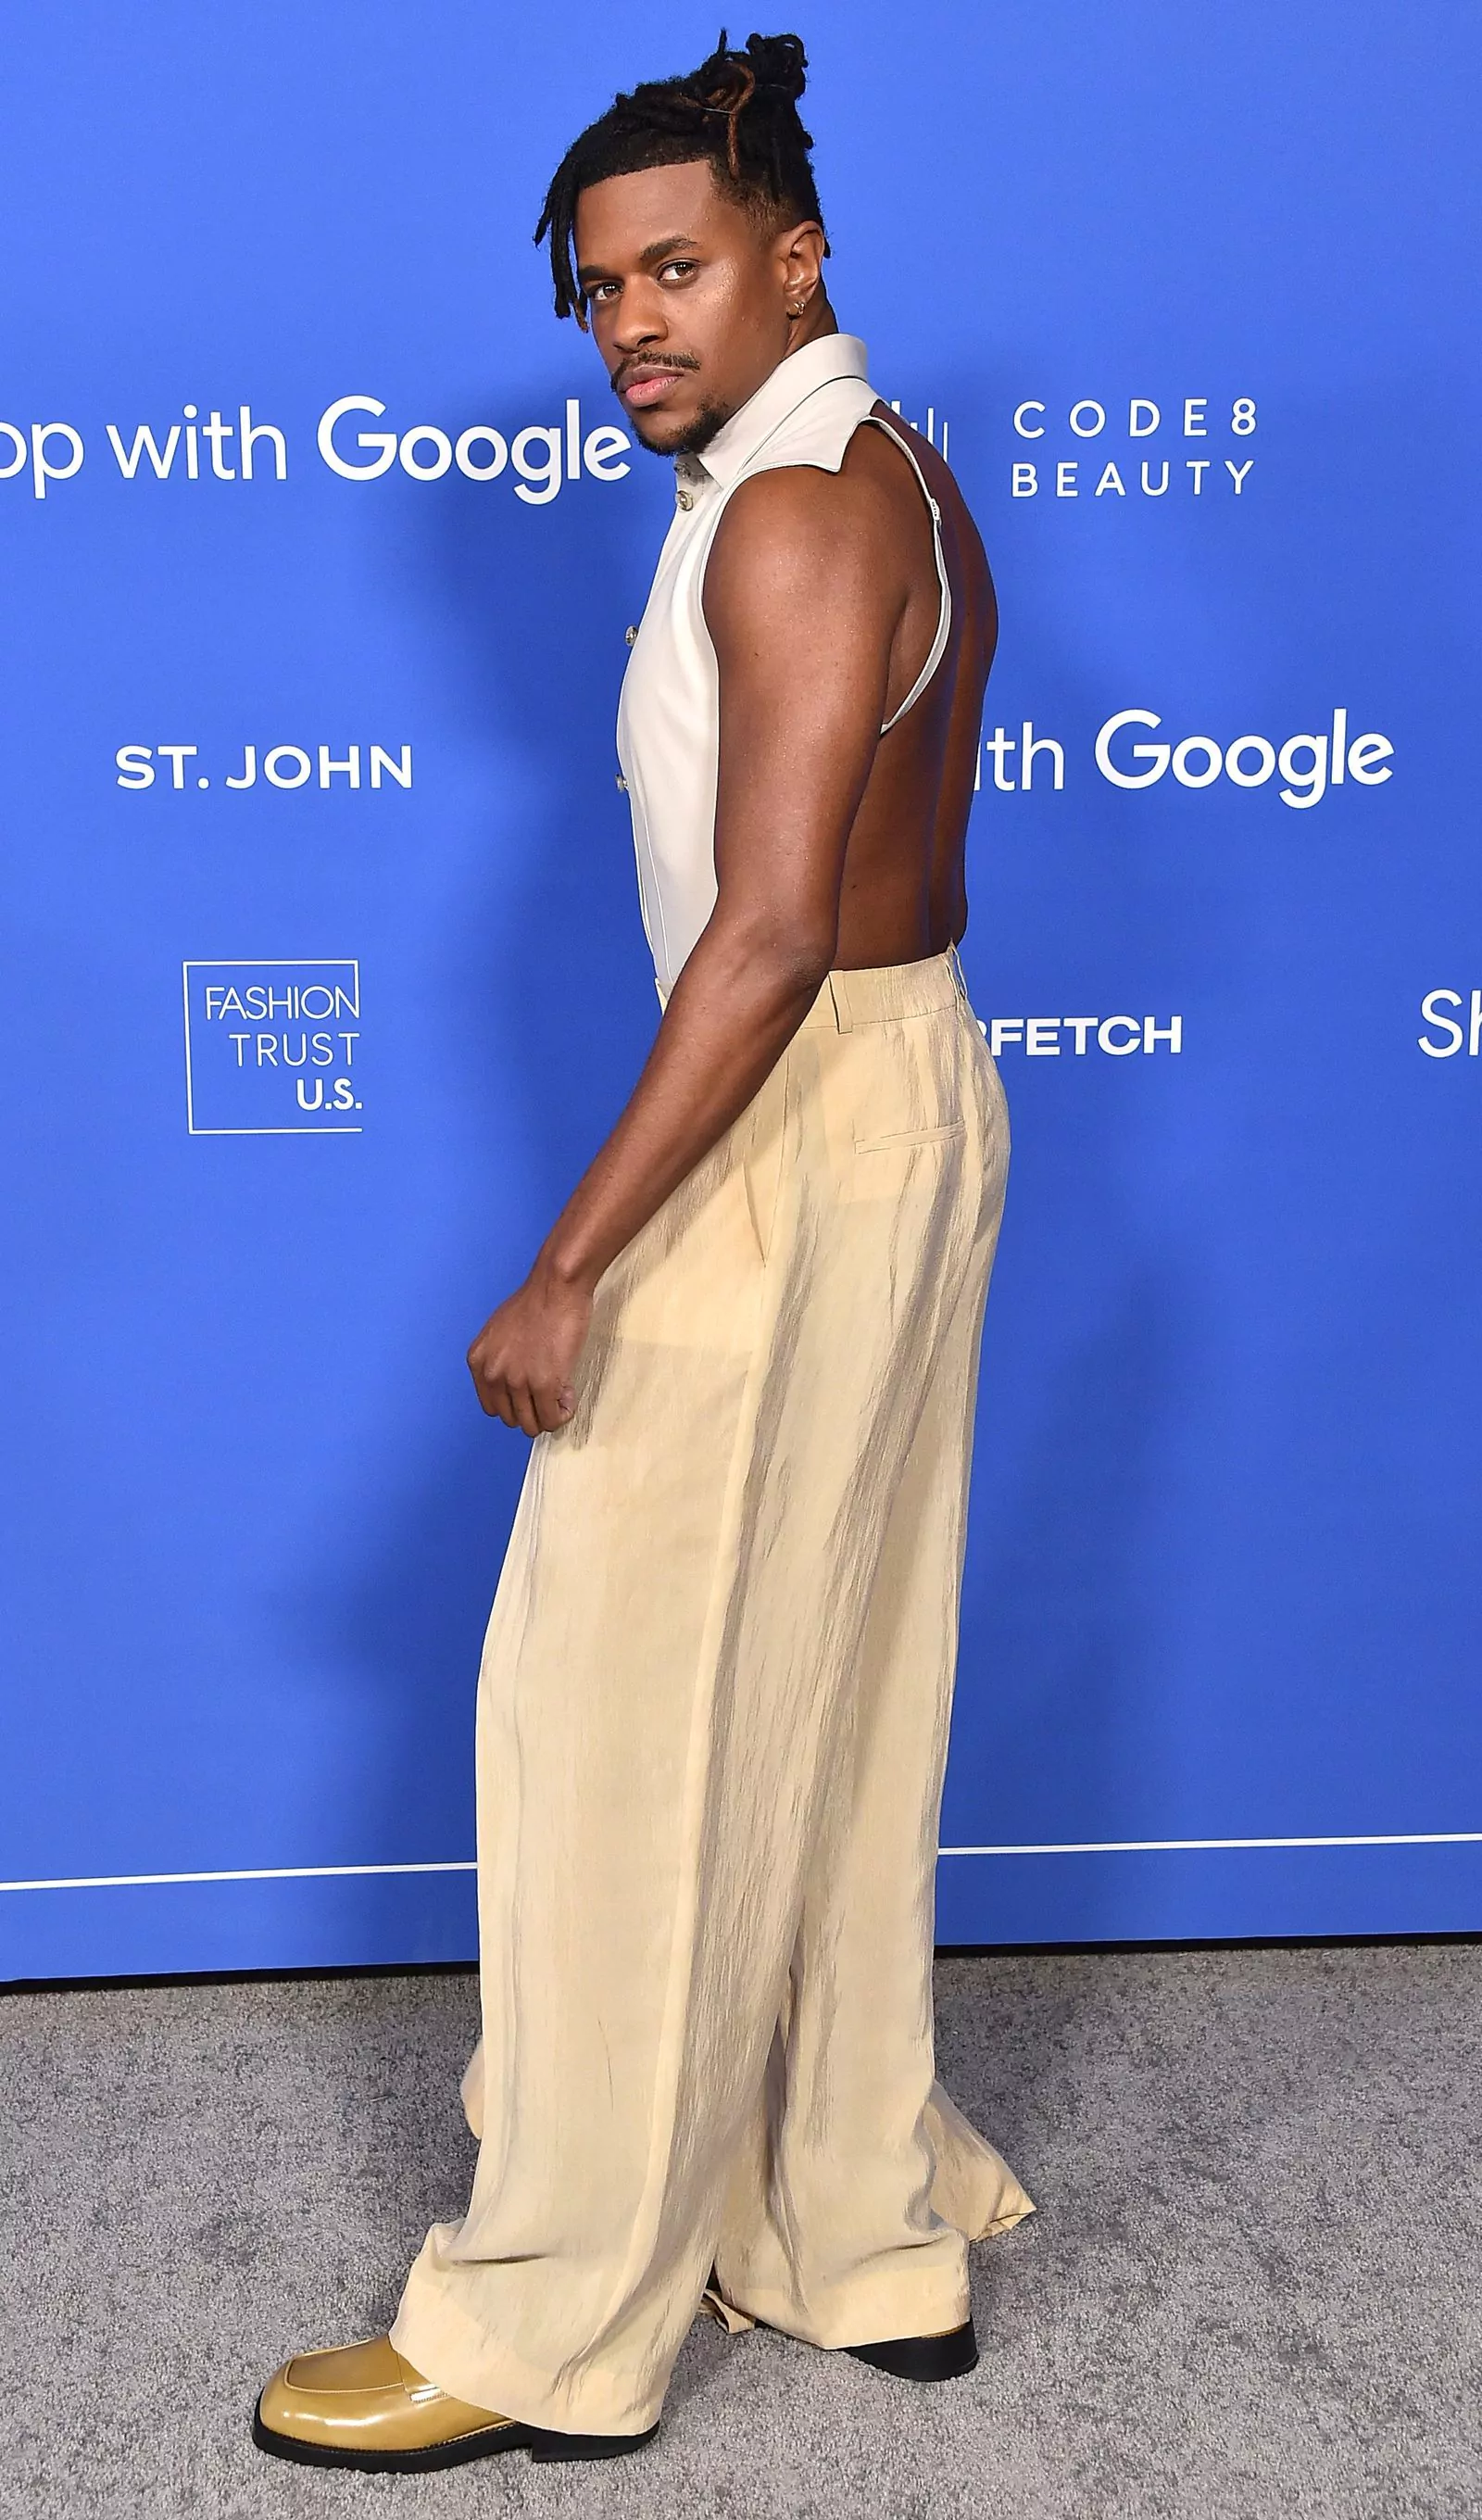 Jeremy Pope at the 2023 Fashion Trust US Awards in Hollywood on March 21, 2023.